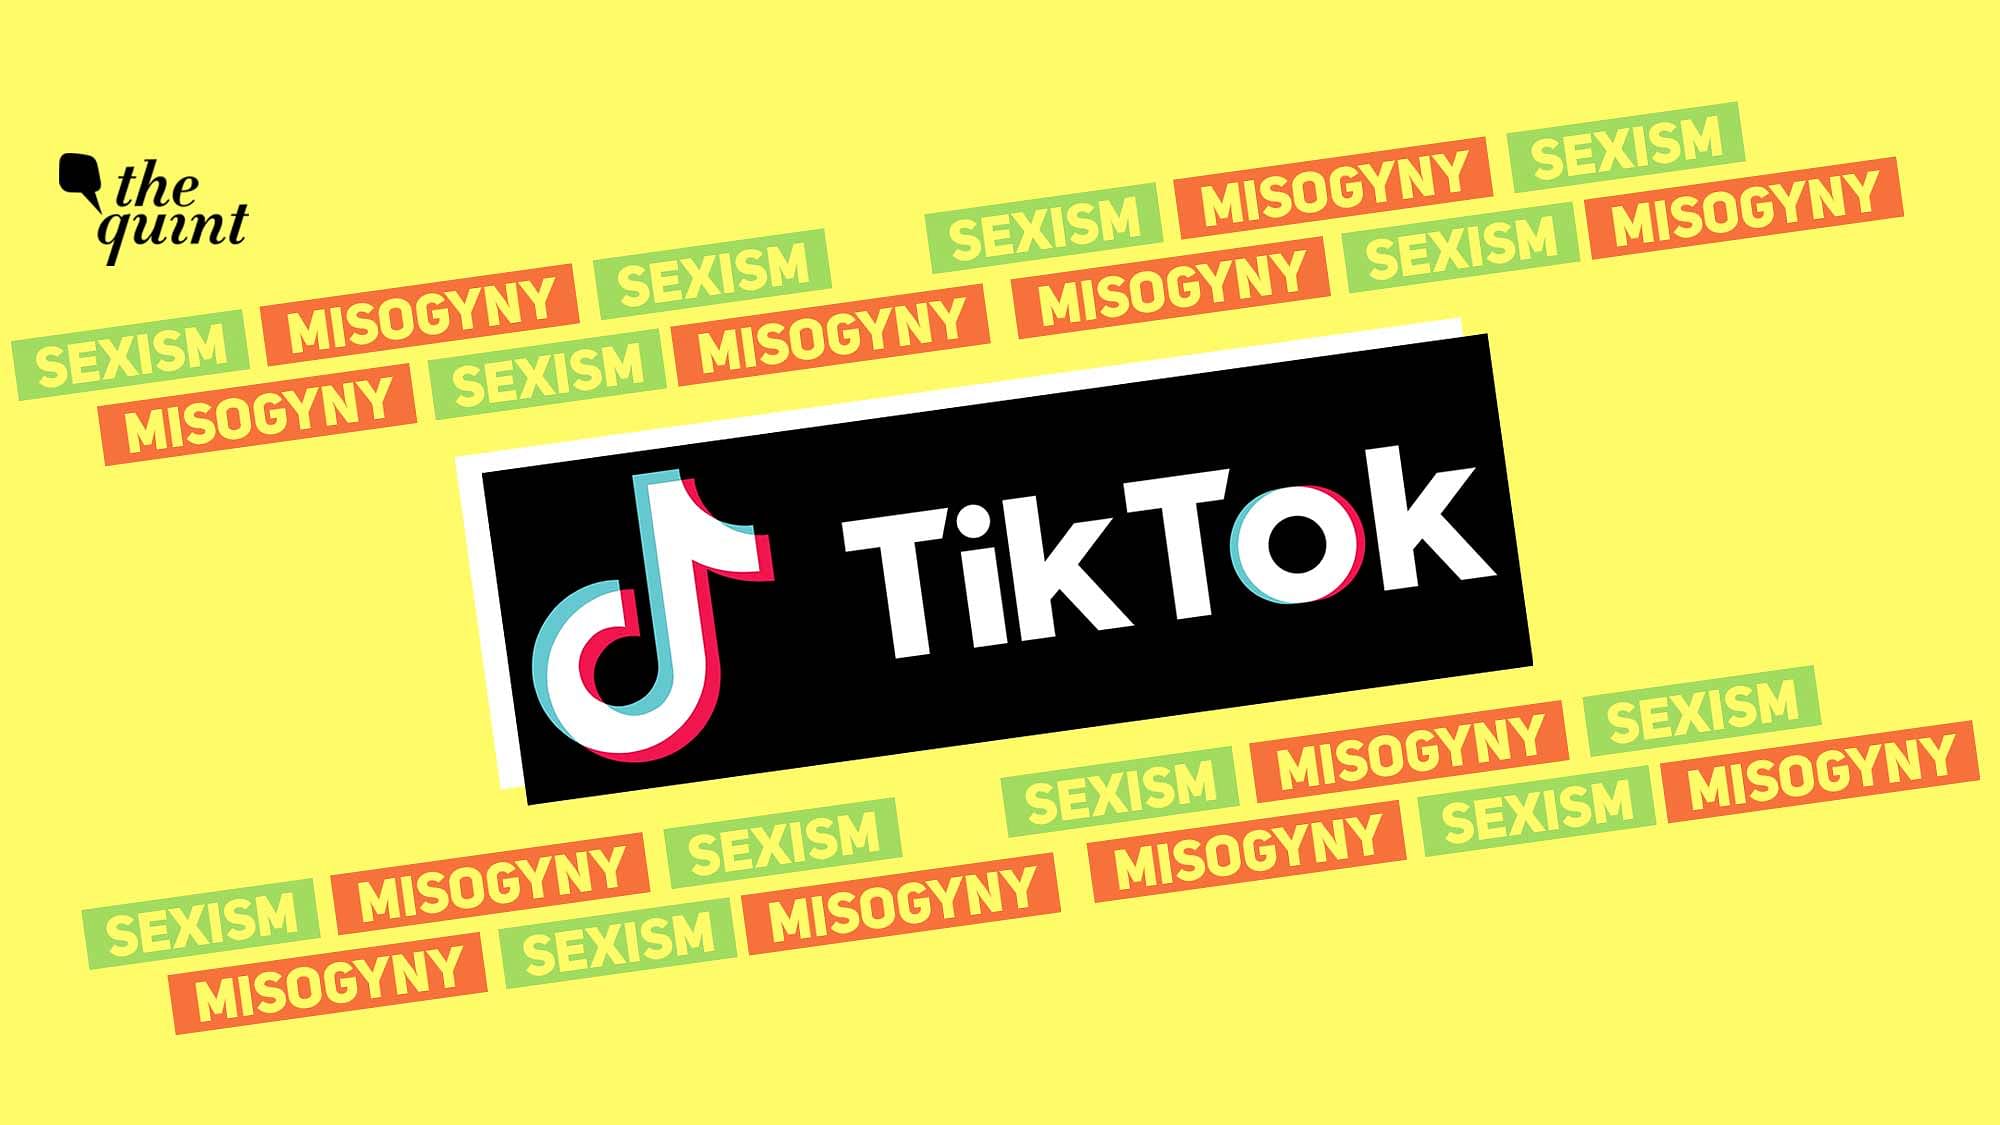 When it comes to violence against women in India, TikTok is just another platform with poor regulation.